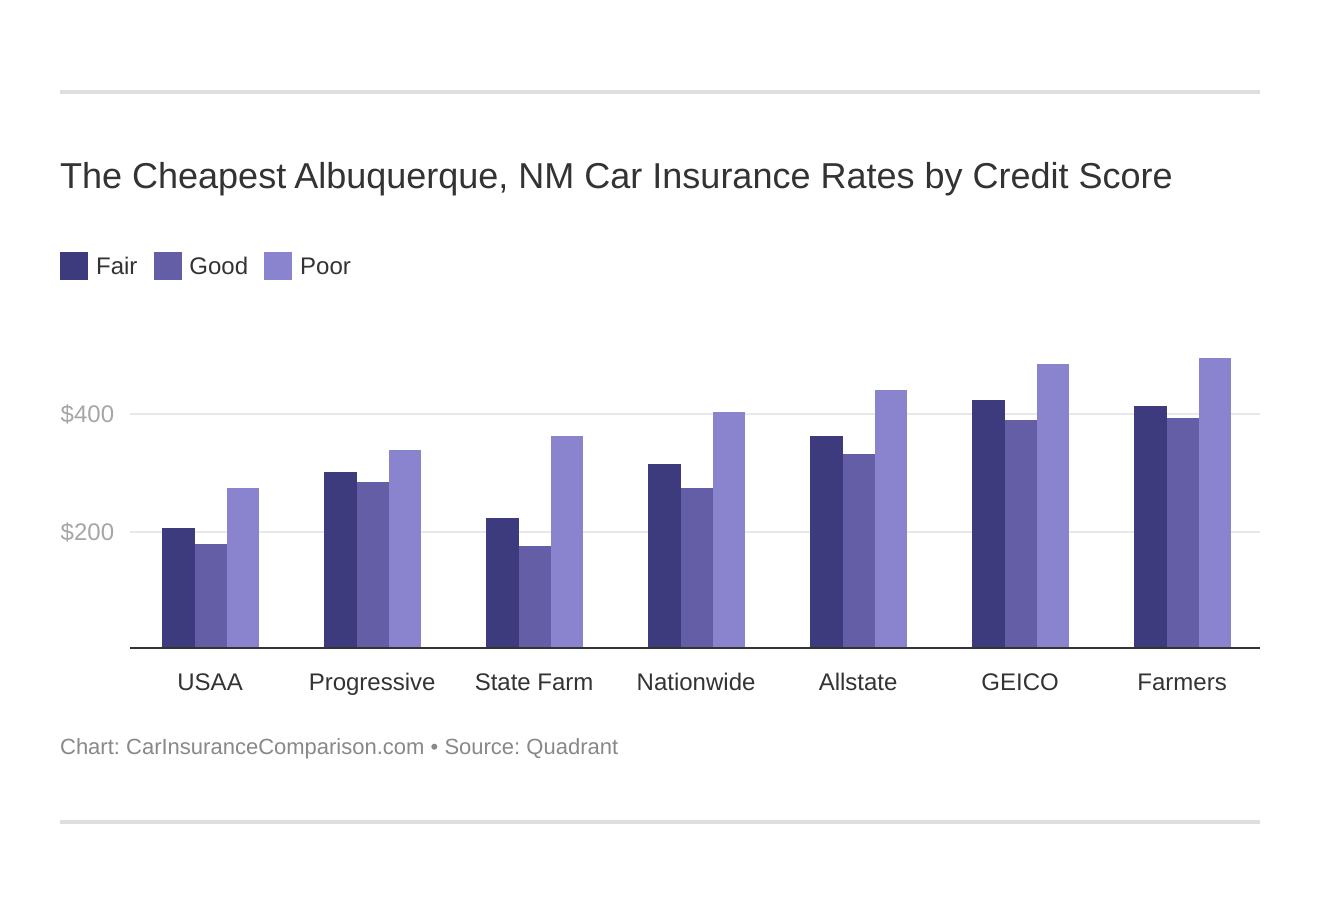 The Cheapest Albuquerque, NM Car Insurance Rates by Credit Score